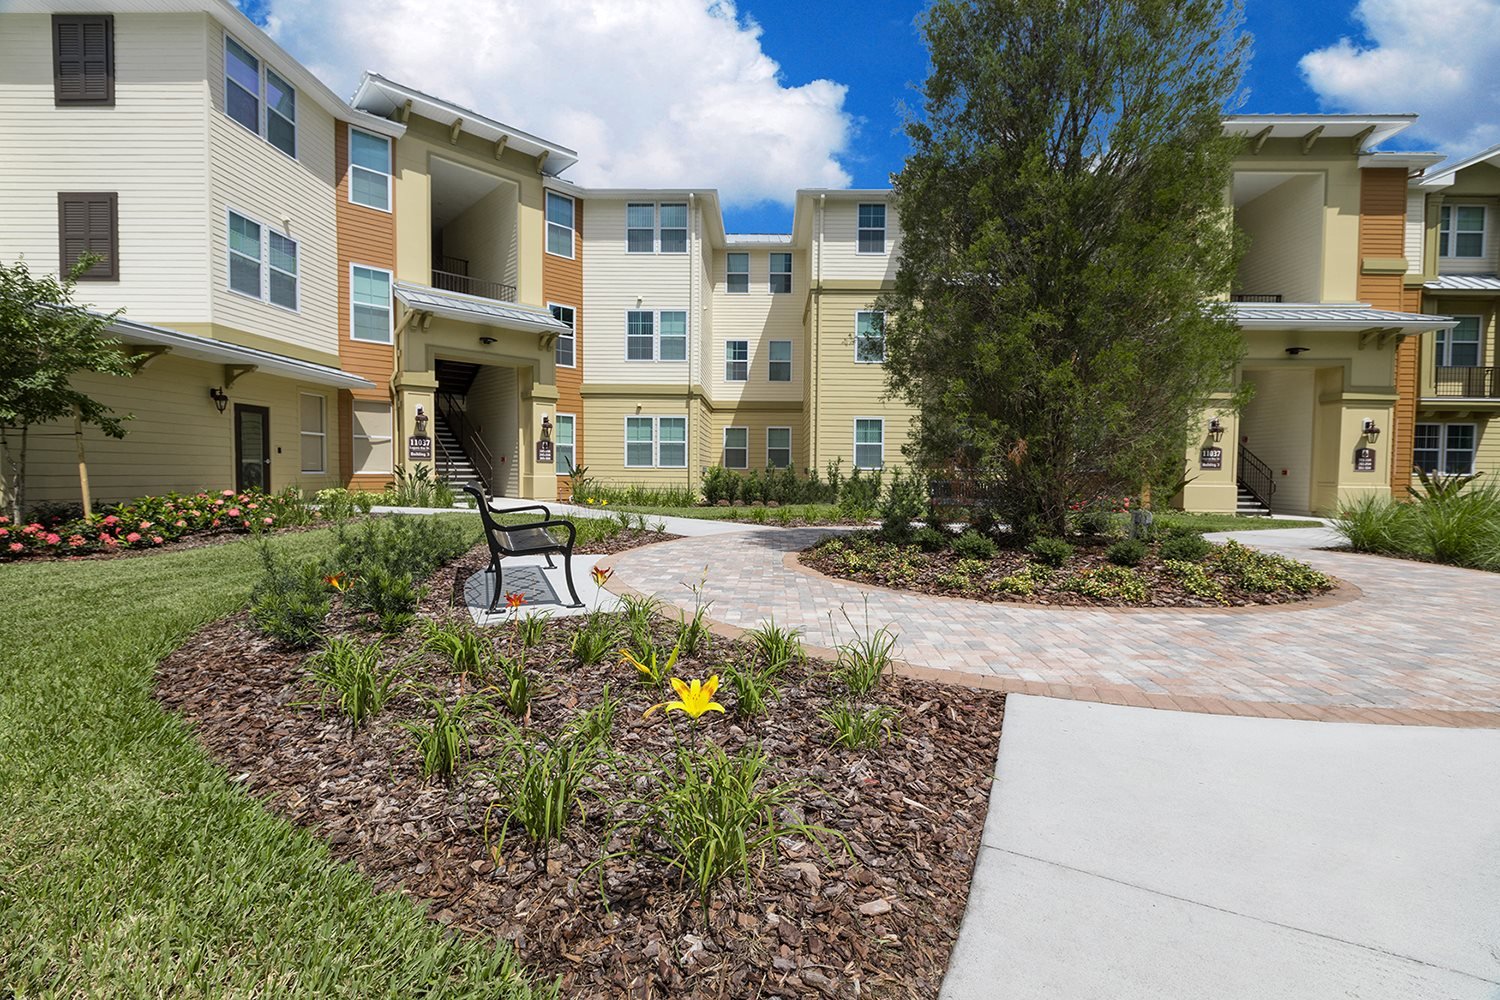 Modern Apartments Near Florida Turnpike for Simple Design